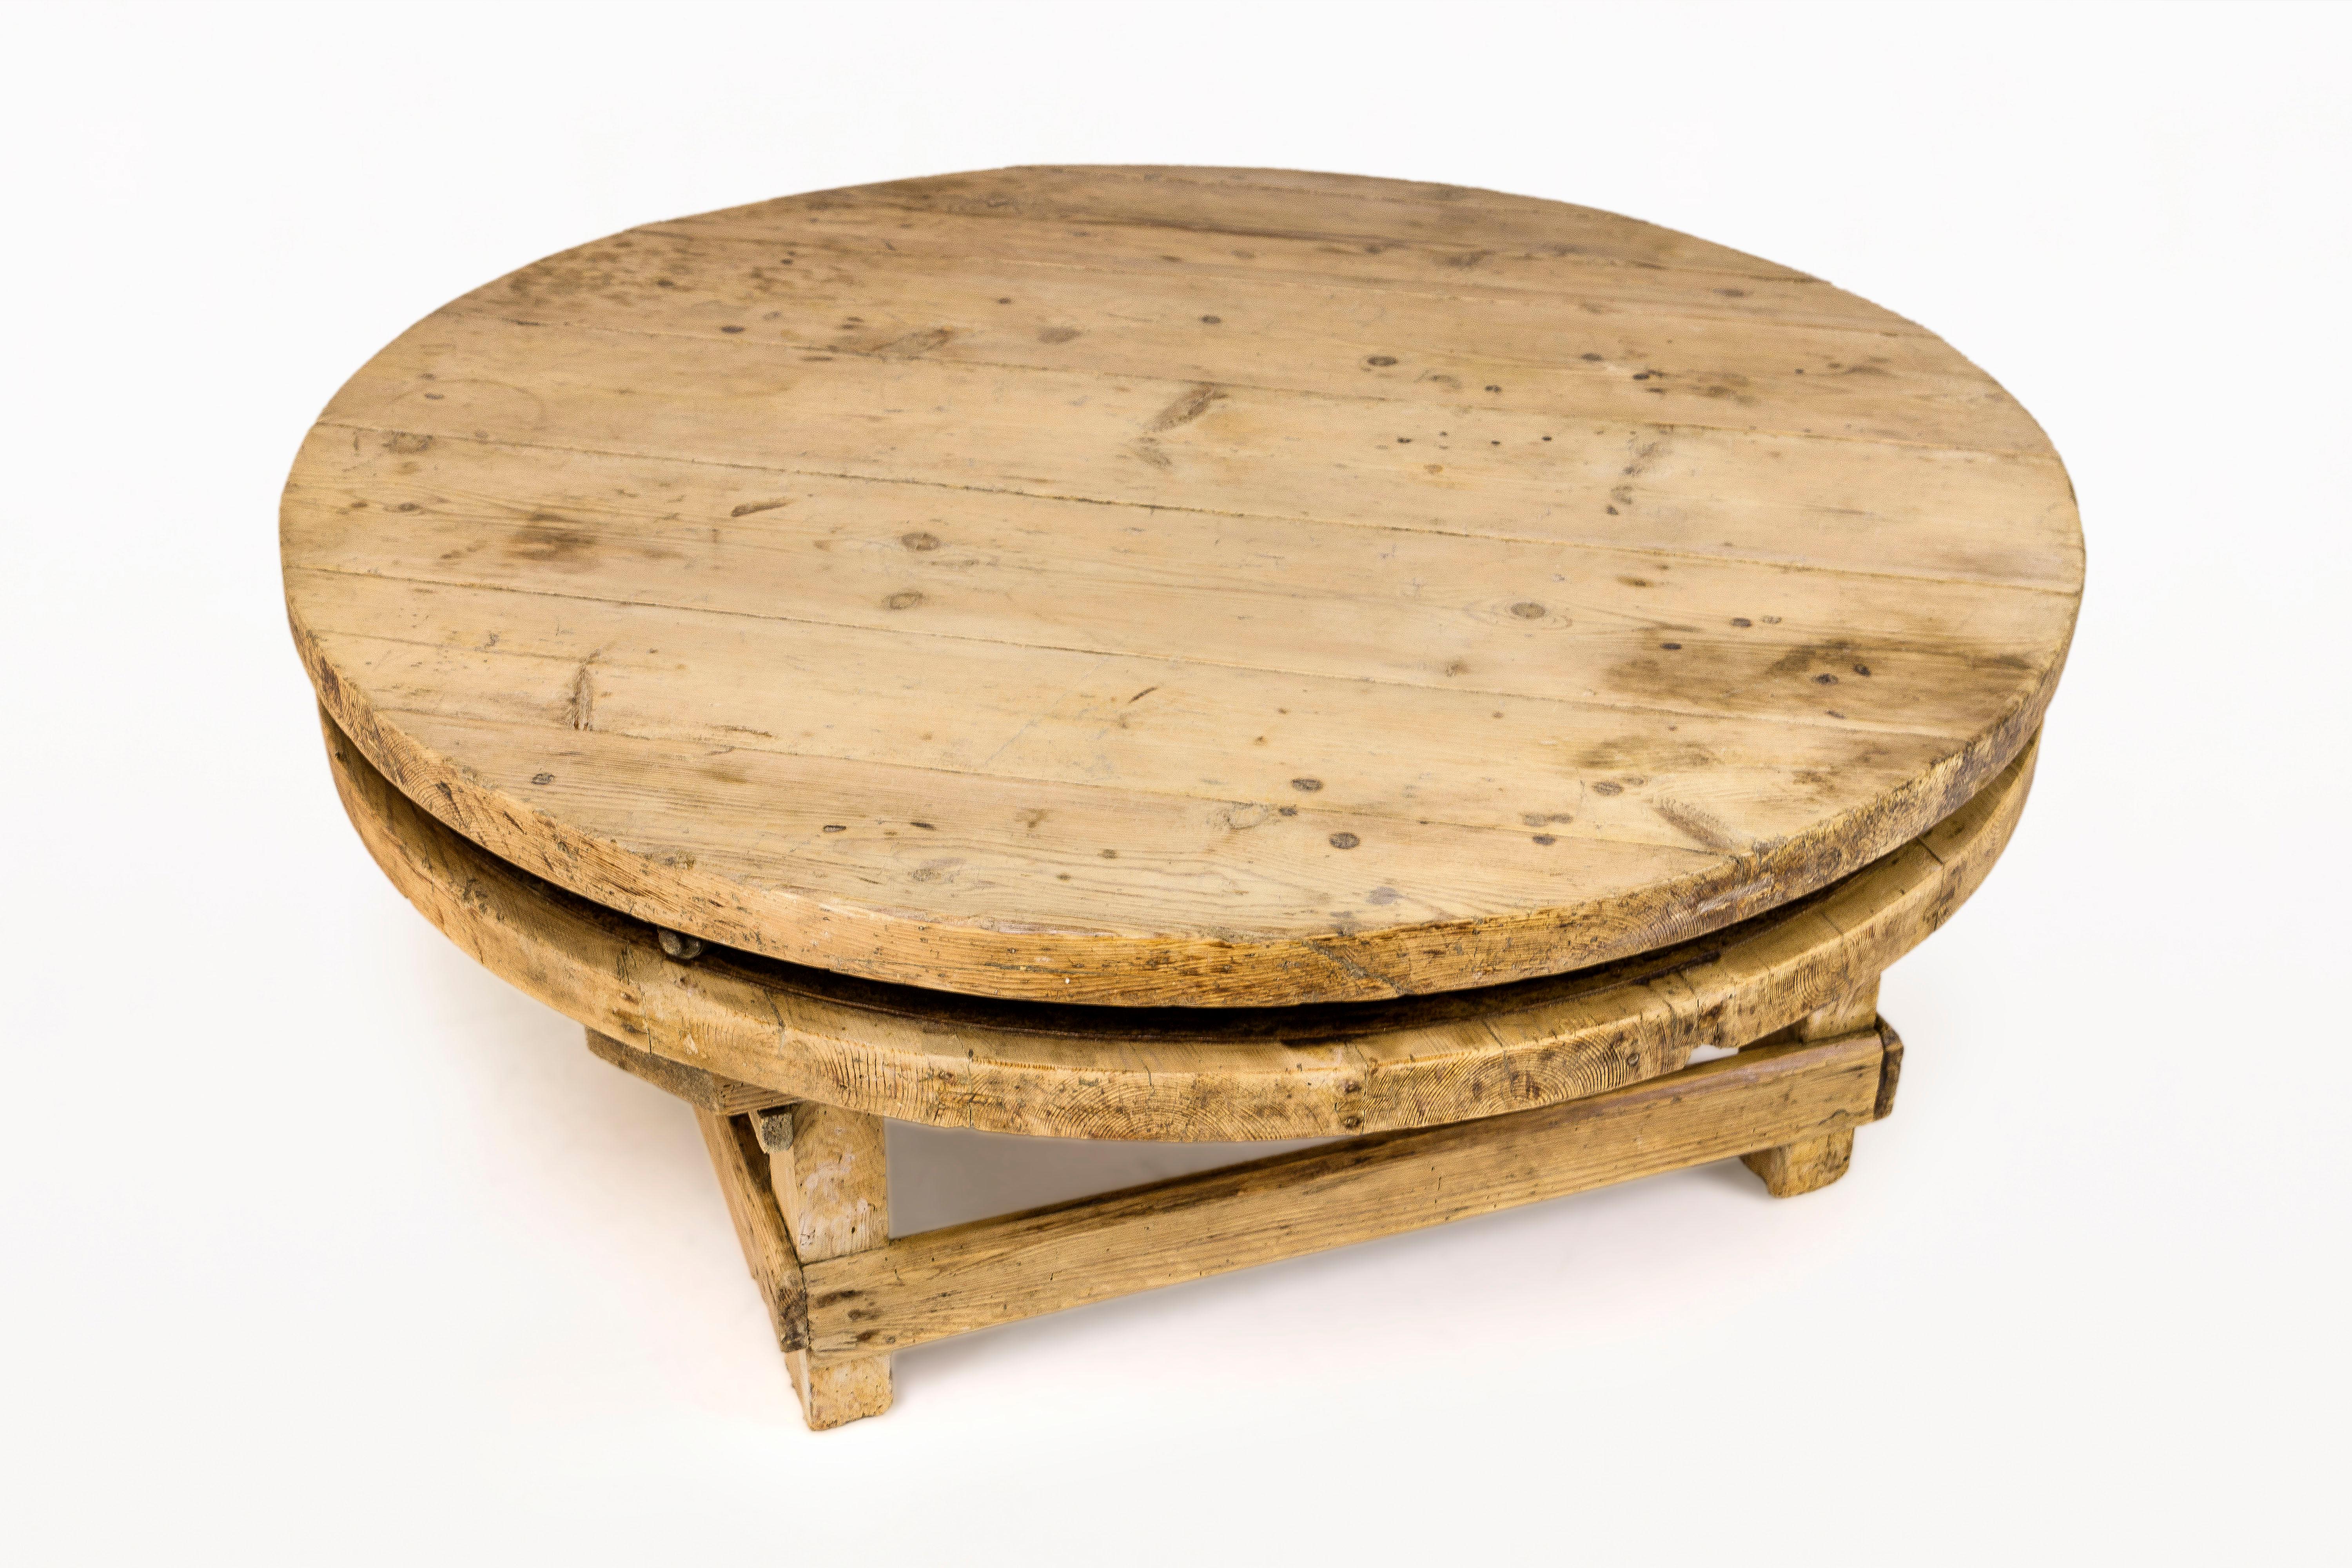 Original 19th century full-size sculpture's table
Coffee table/rustic coffee table.
Made with pine.
The tabletop rotates 360 degrees on its axis,
circa 1900, France.
Wear consistent with age and use.
Good vintage condition.